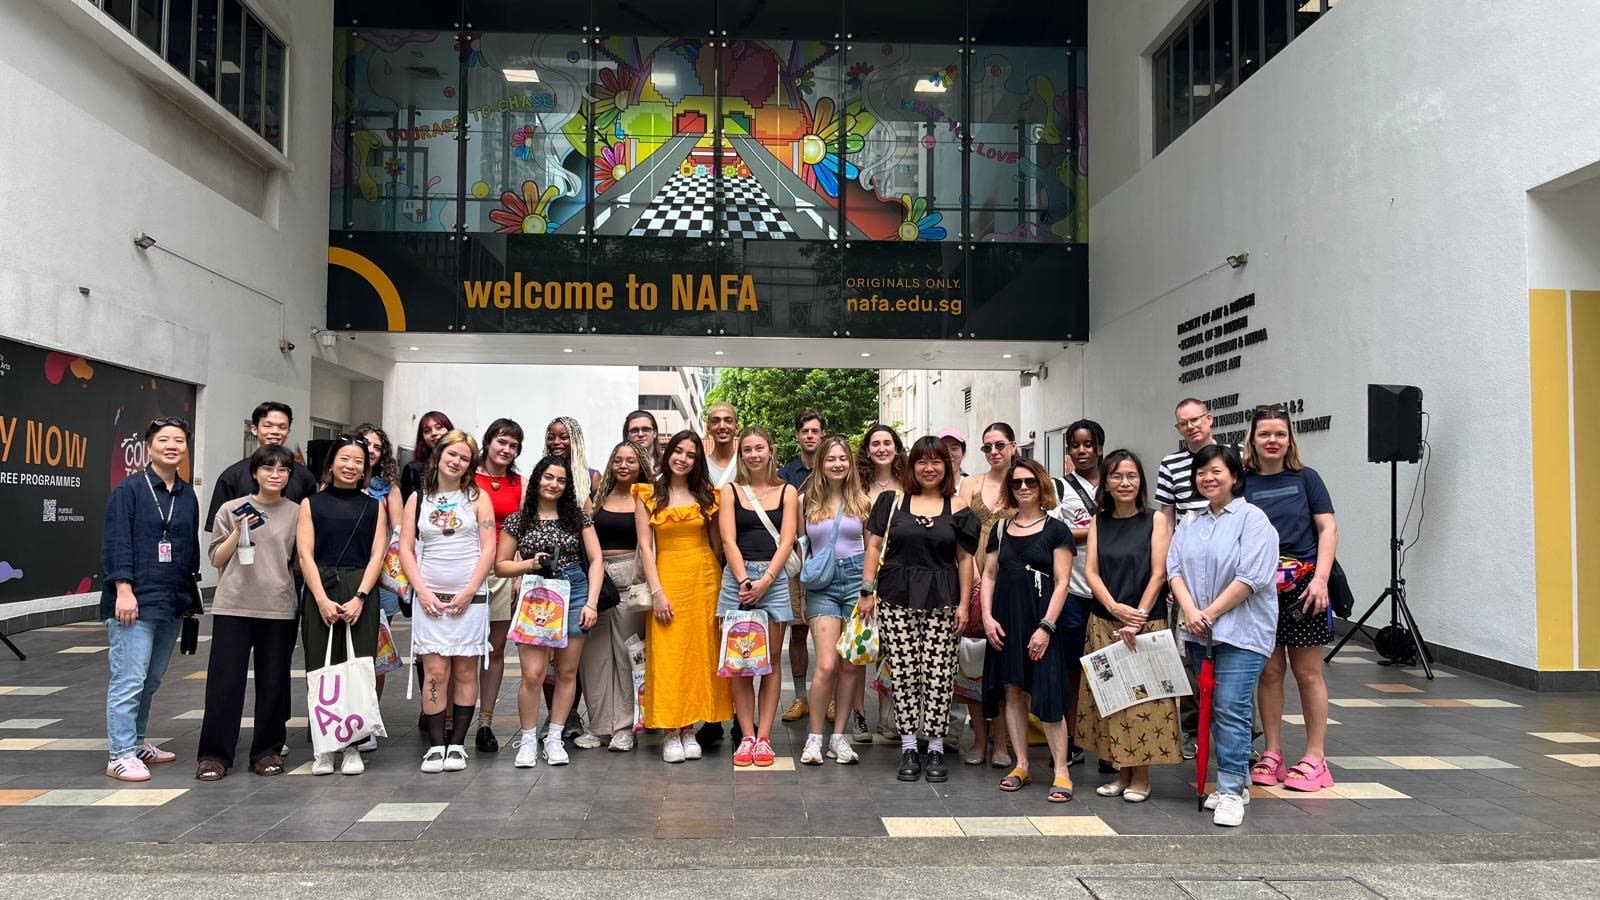 Image shows a group of around 25 people standing in front of a building that reads ‘Welcome to NAFA’ 